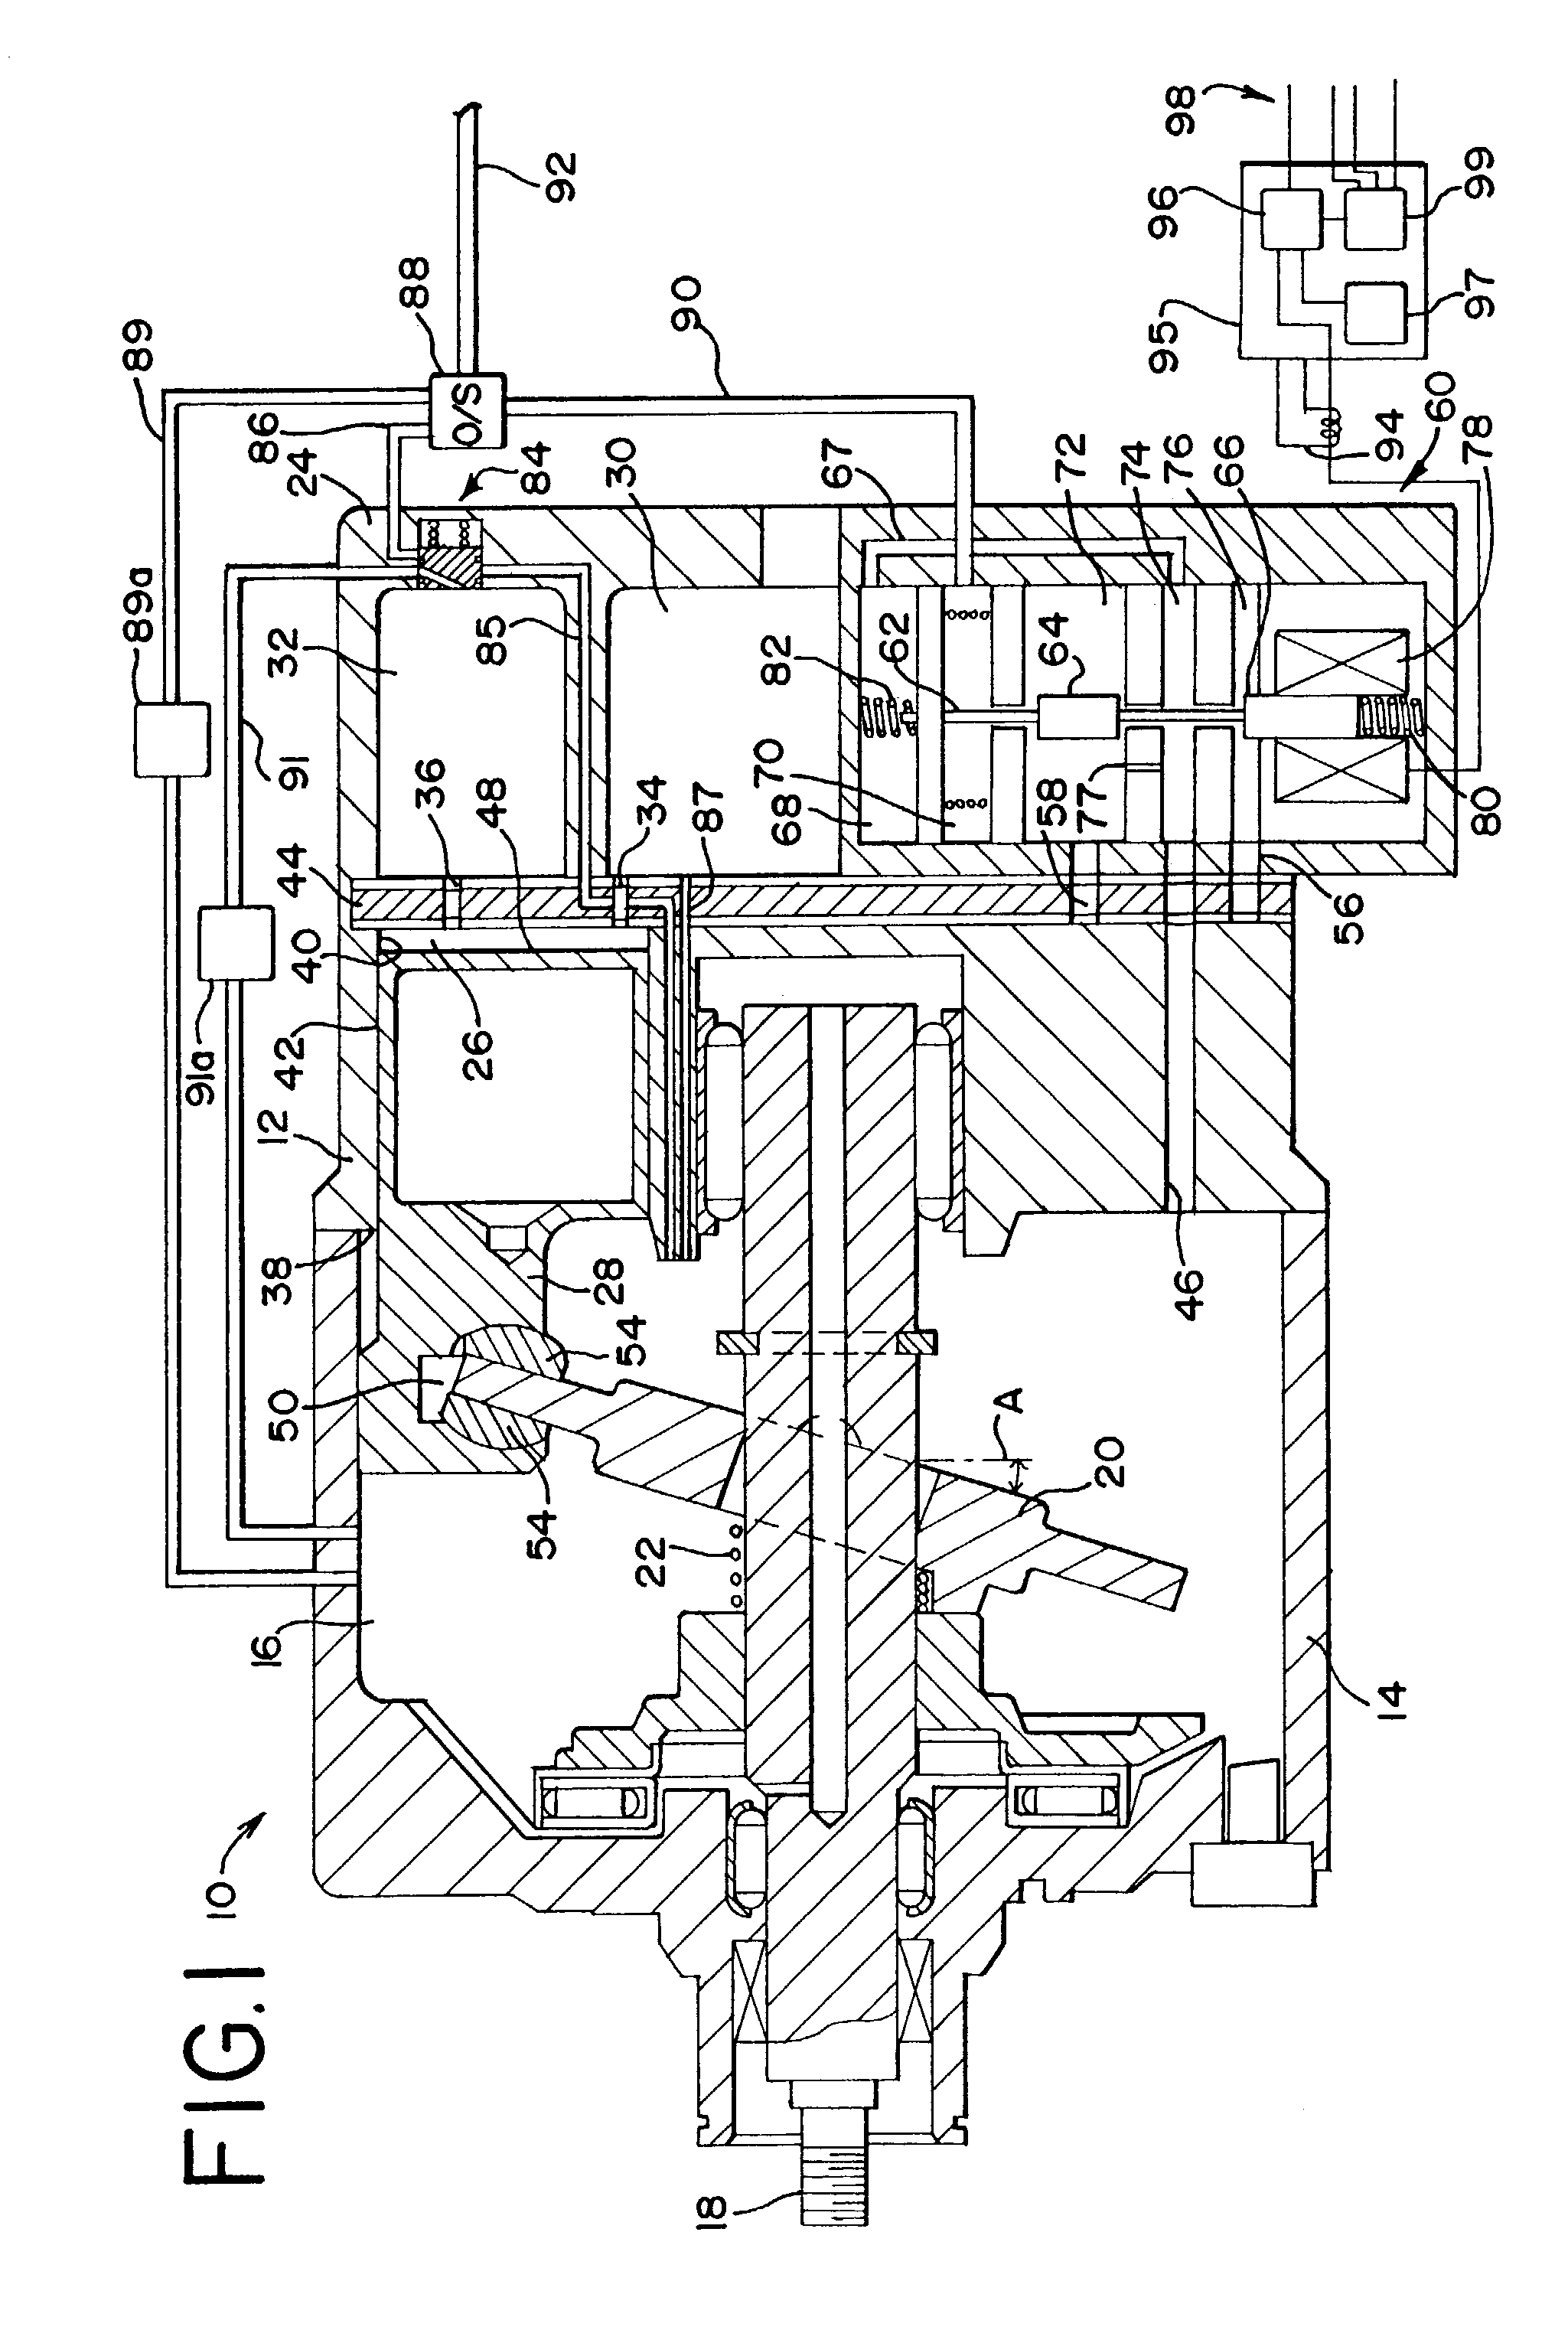 Controls for variable displacement compressor